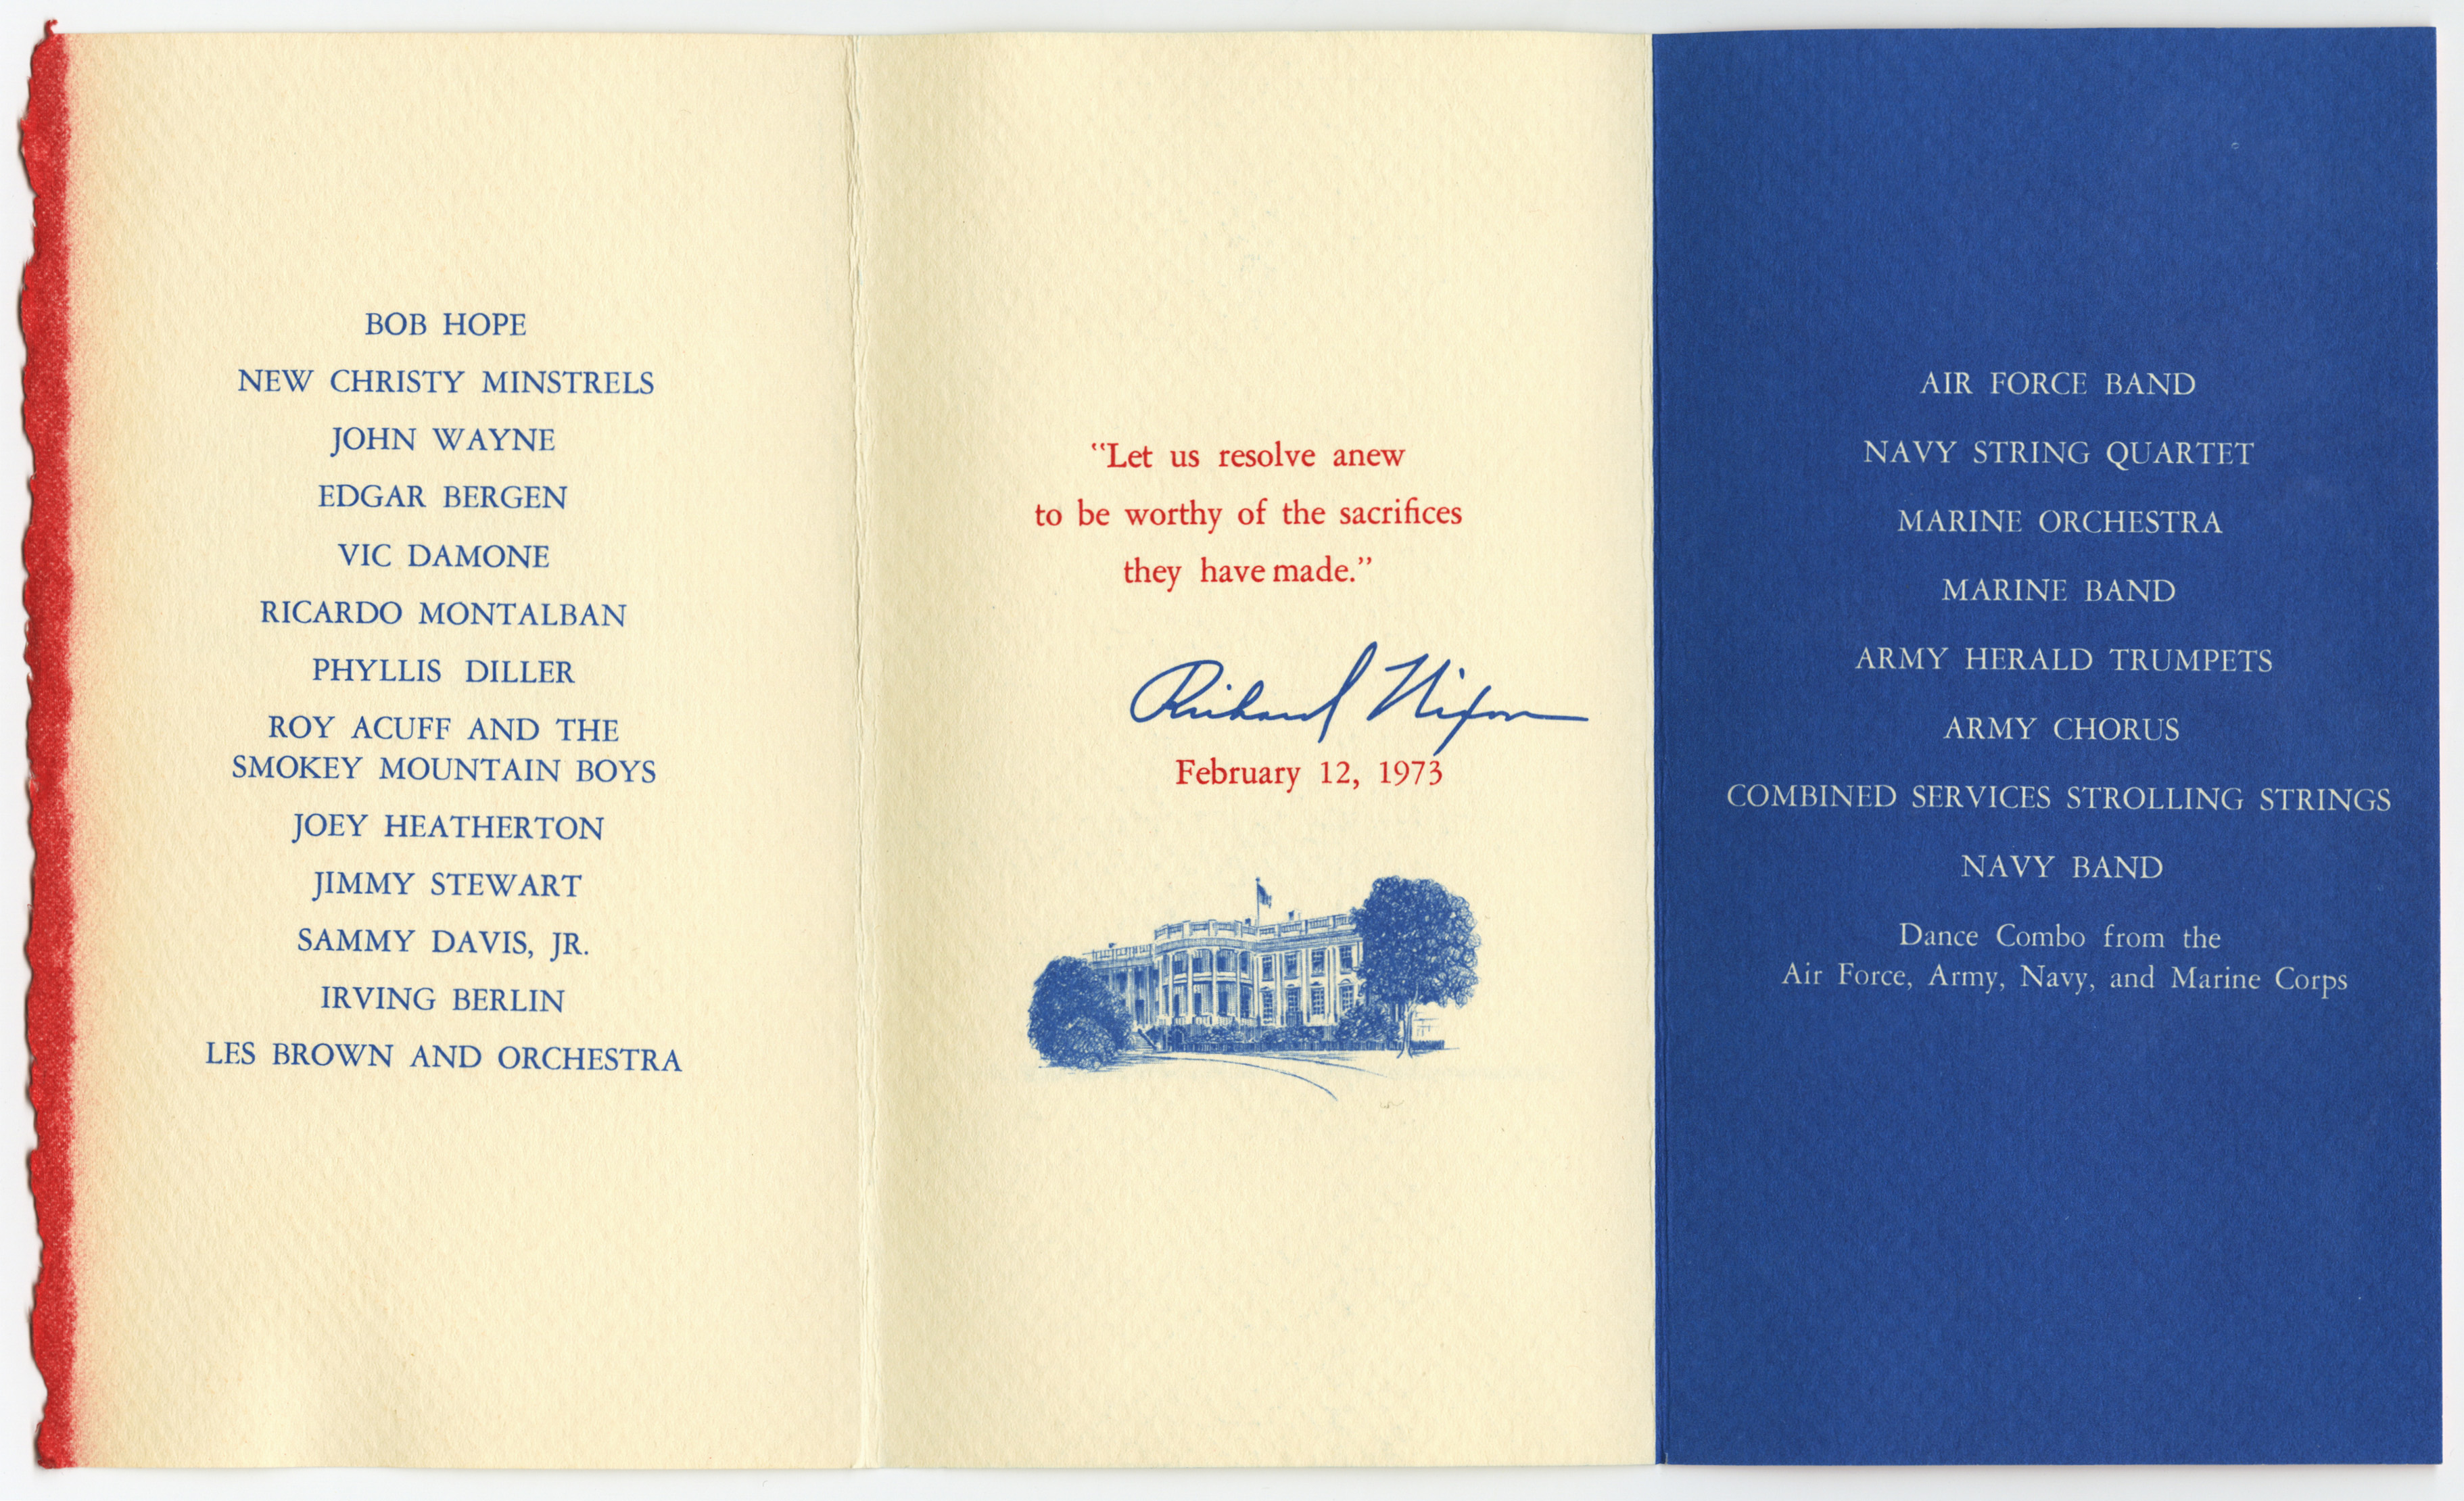 Invitation and program for the White House Dinner in Honor of Returning Vietnam POWs in 1973. Photo courtesy of Ted Sienicki.